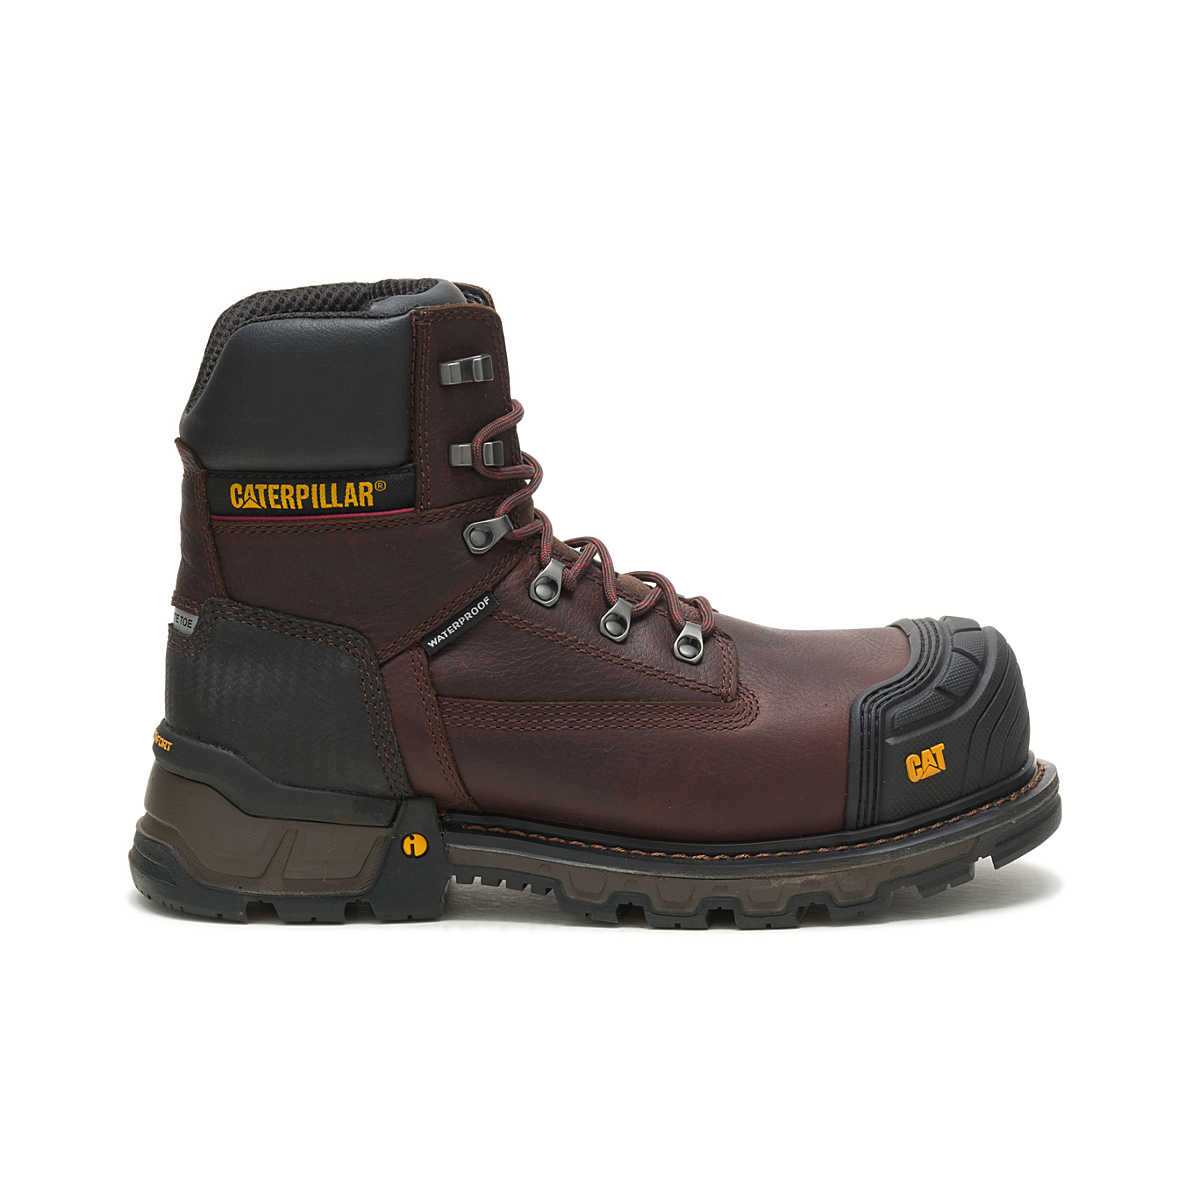 Excavator XL 6” WP TX CT CSA Work Boot, Red Brown, dynamic 1